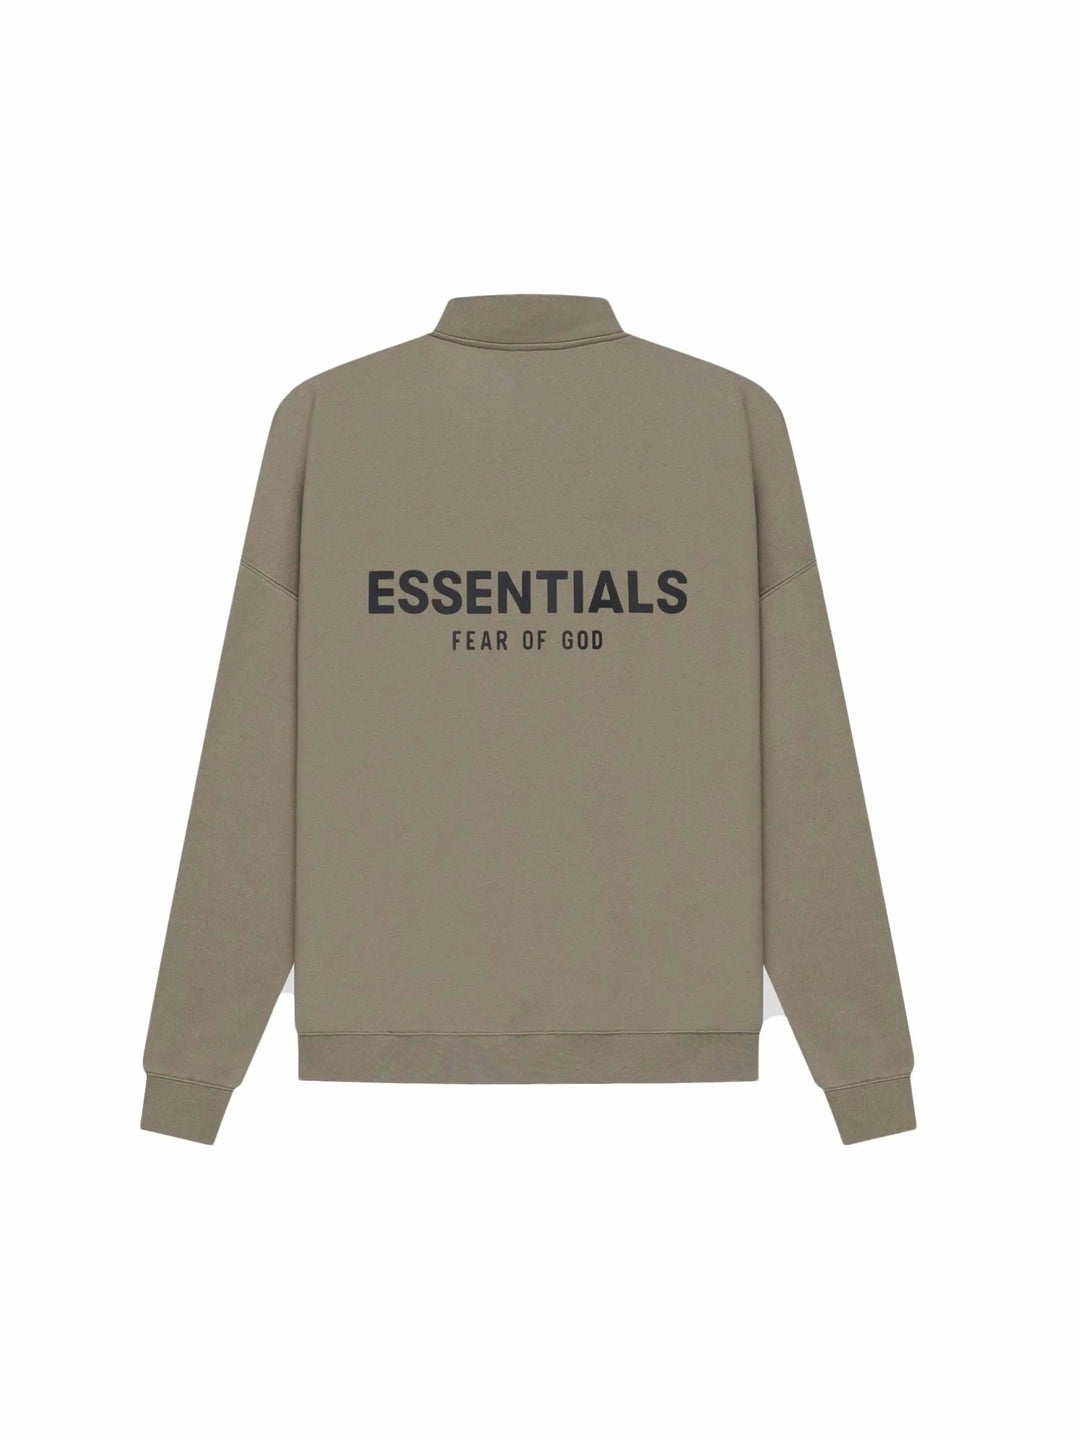 Fear of God Essentials Half Zip Sweater Taupe (SS21) - Prior